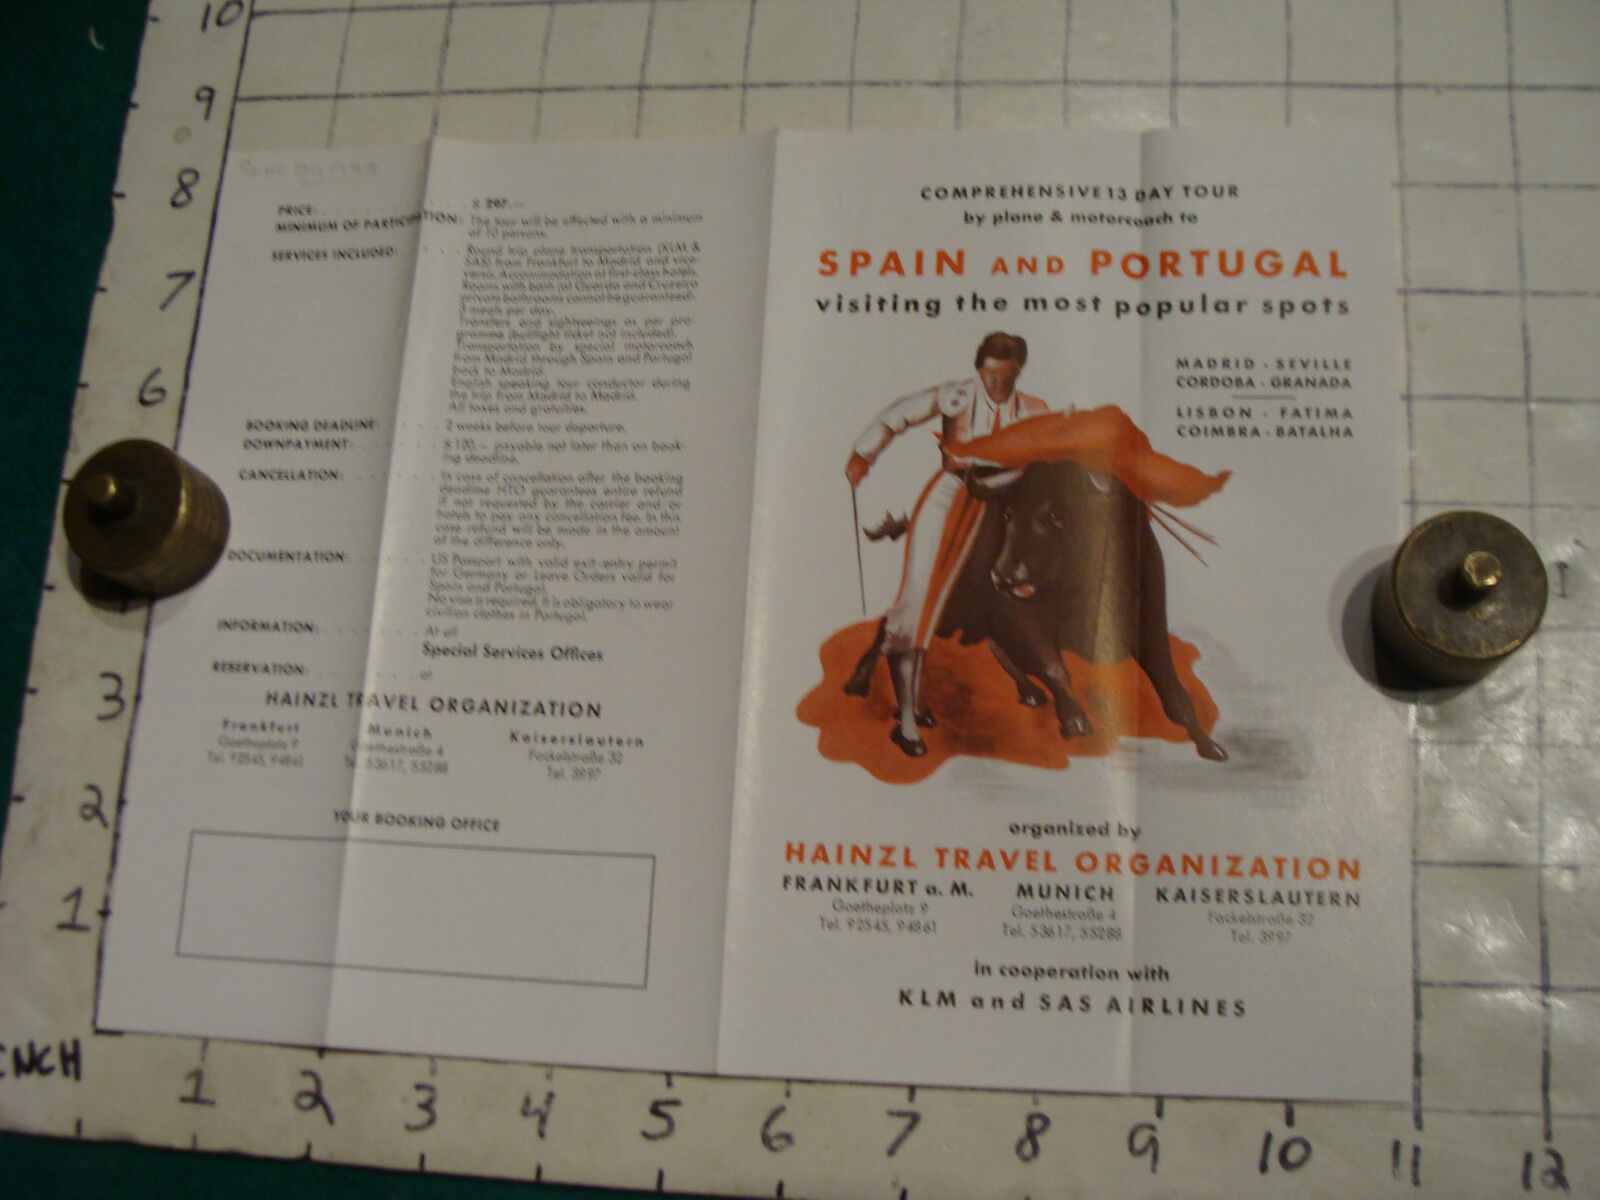  brochure: SPAIN & PORTUGAL, 1953 in cooperation KLM and SAS airlines, folded